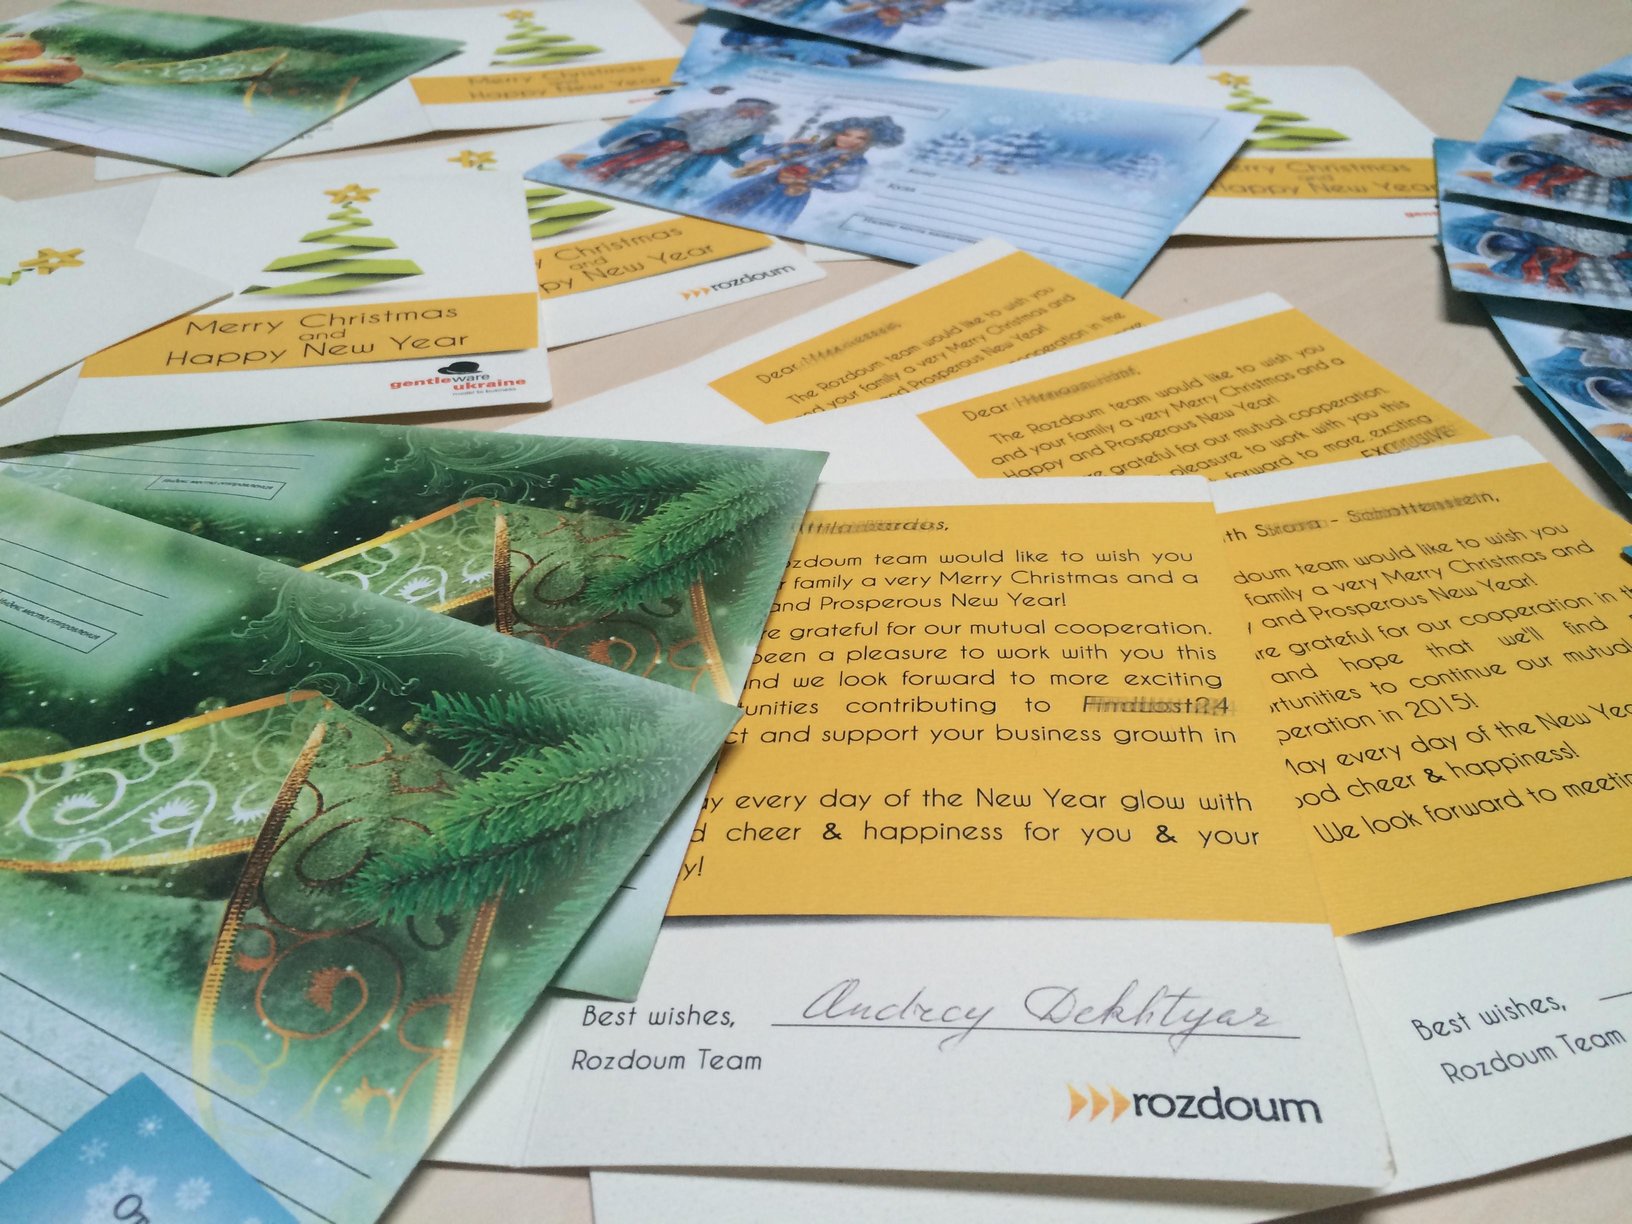 Receive Rozdoujm New Year Postcards during the winter holidays